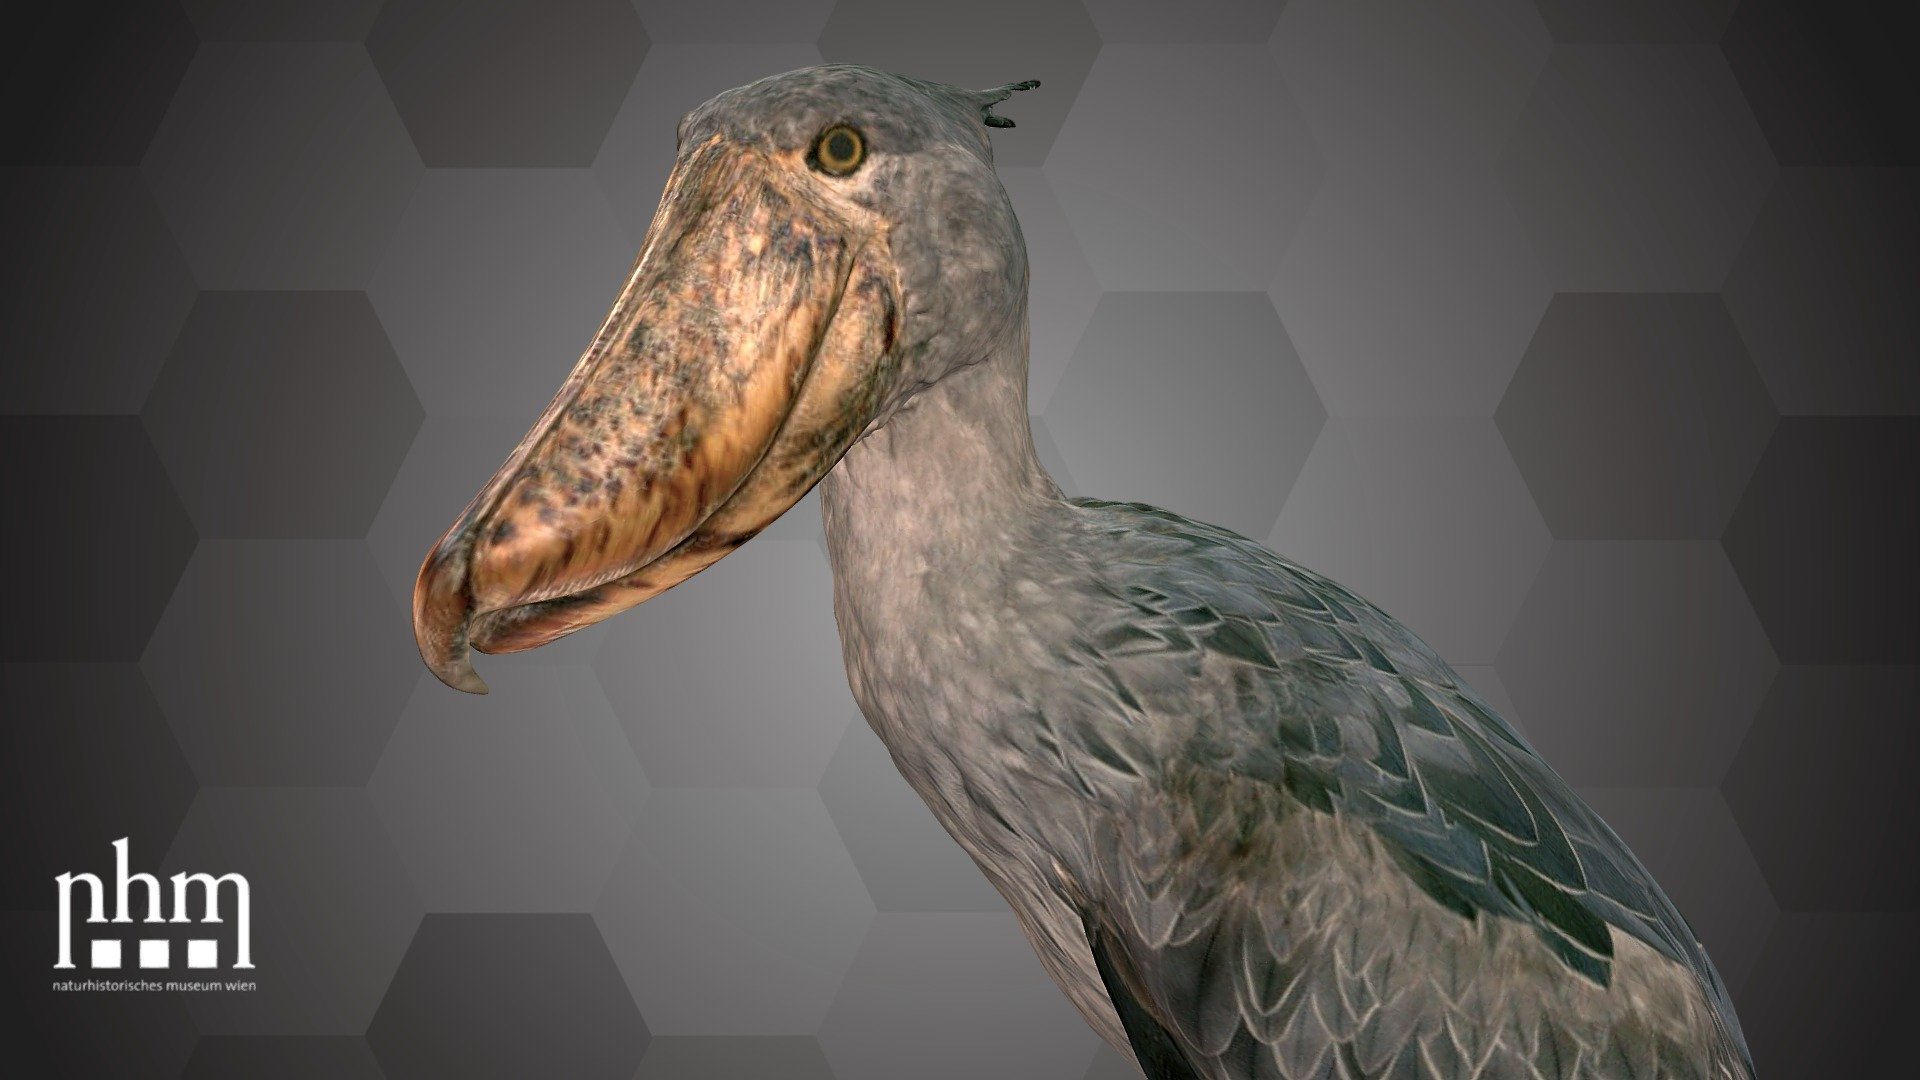 3D scan of a mount of a shoebill (Balaeniceps rex), that can stand up to 1.2 meters. Its name refers to the enormous beak that resembles a shoe. In Southern Sudan B. rex inhabits swamps and lakeshores where papyrus and reeds grow. This material is used to build their nests. This specimen of the rare African bird comes from the Bahr el Ghazal estuary in Sudan and was donated to the NHM Vienna in 1913. 

The Shoebill is Number 76 of the NHM Top 100 and can be found in Hall 30 of the NHM Vienna.

Specimen: Balaeniceps rex (Gould, 1850)

Inventory number: NHMW-Zoo-VS 62.593

Collection: Natural History Museum Vienna, 1st Zoological Dept., Bird Coll. (curator: Swen Renner)

Find out more about the NHMW here.

Scanned and edited by Anna Haider &amp; Viola Winkler (NHMW)

Scanner: Artec Leo. Infrastructure funded by the FFG 3d model